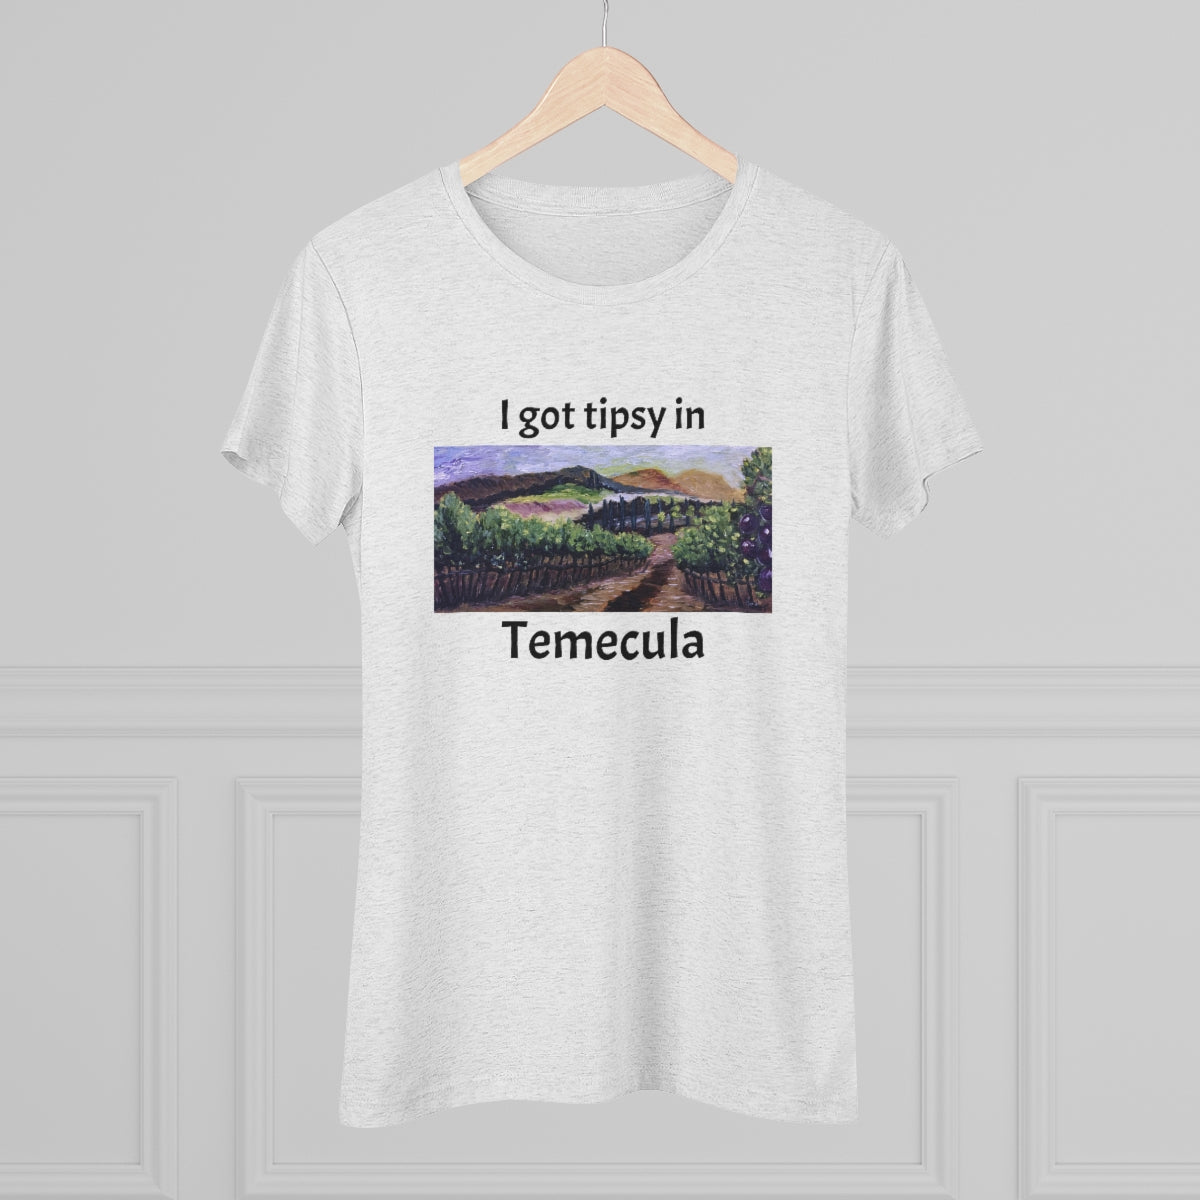 I got tipsy in Temecula Women's fitted Triblend Tee Temecula tee shirt souvenir "Afternoon Vines"